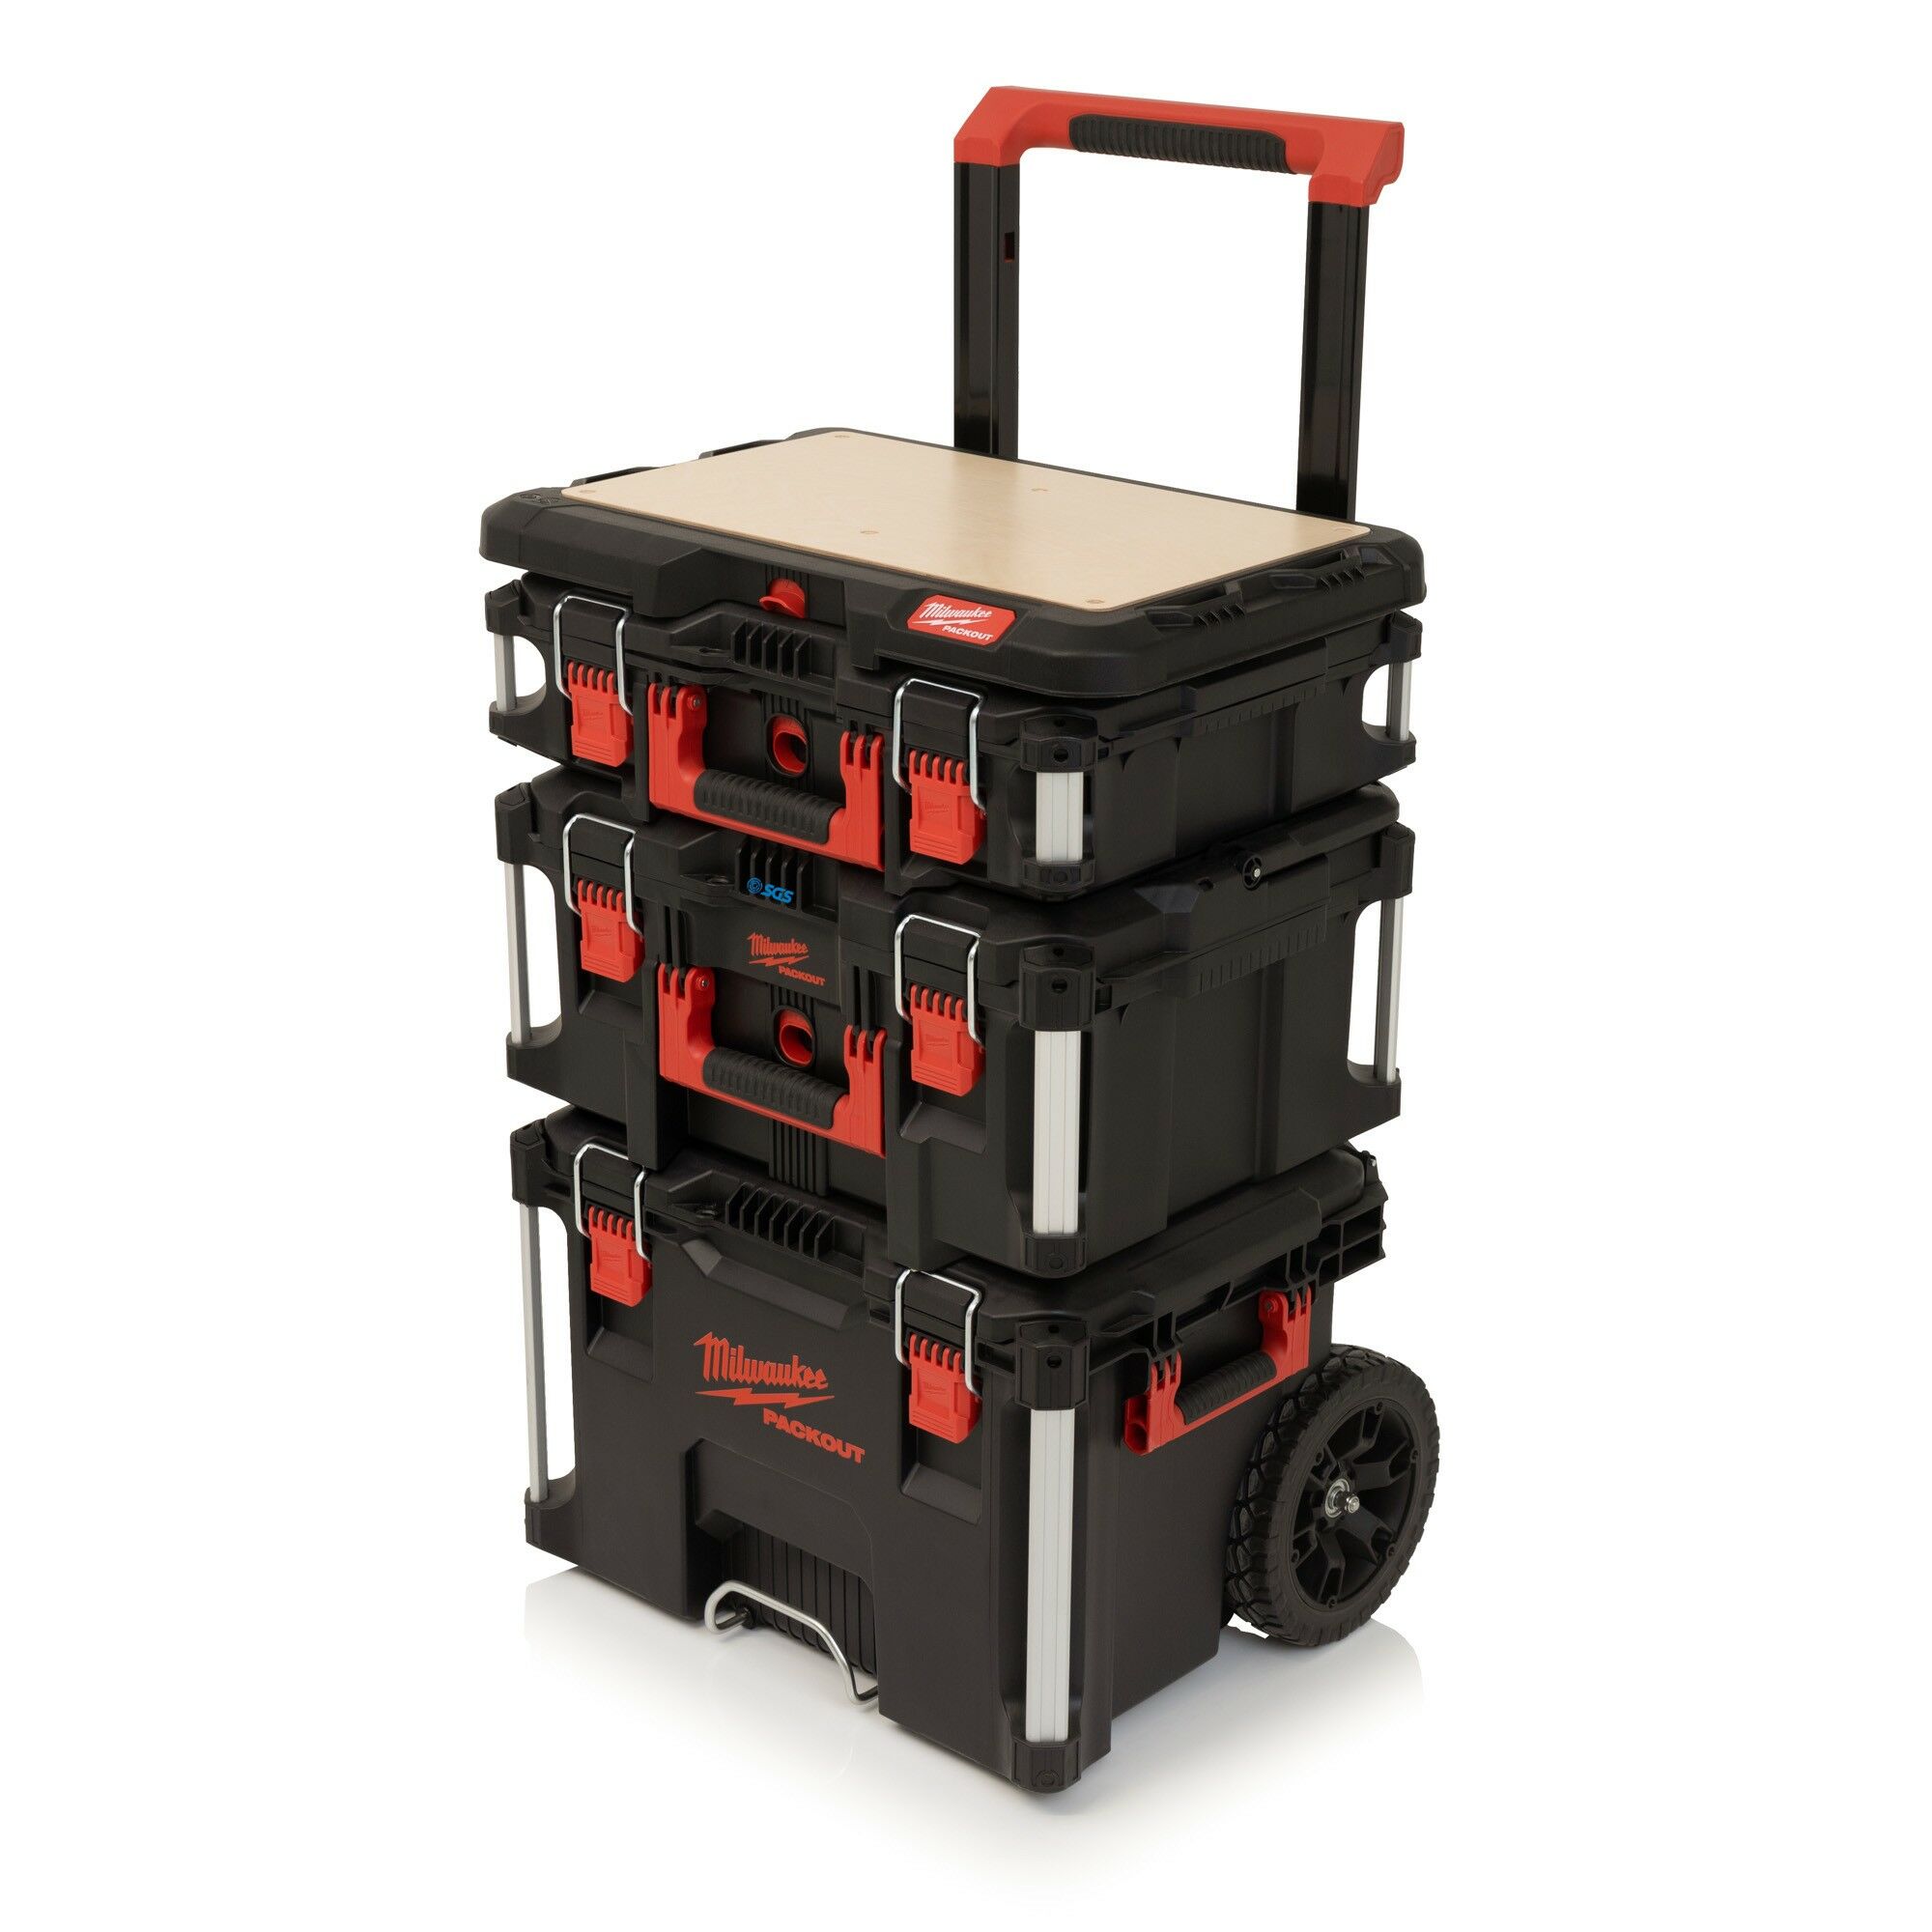 Milwaukee PACKOUT Bundle with 3 Toolbox System and Work Surface